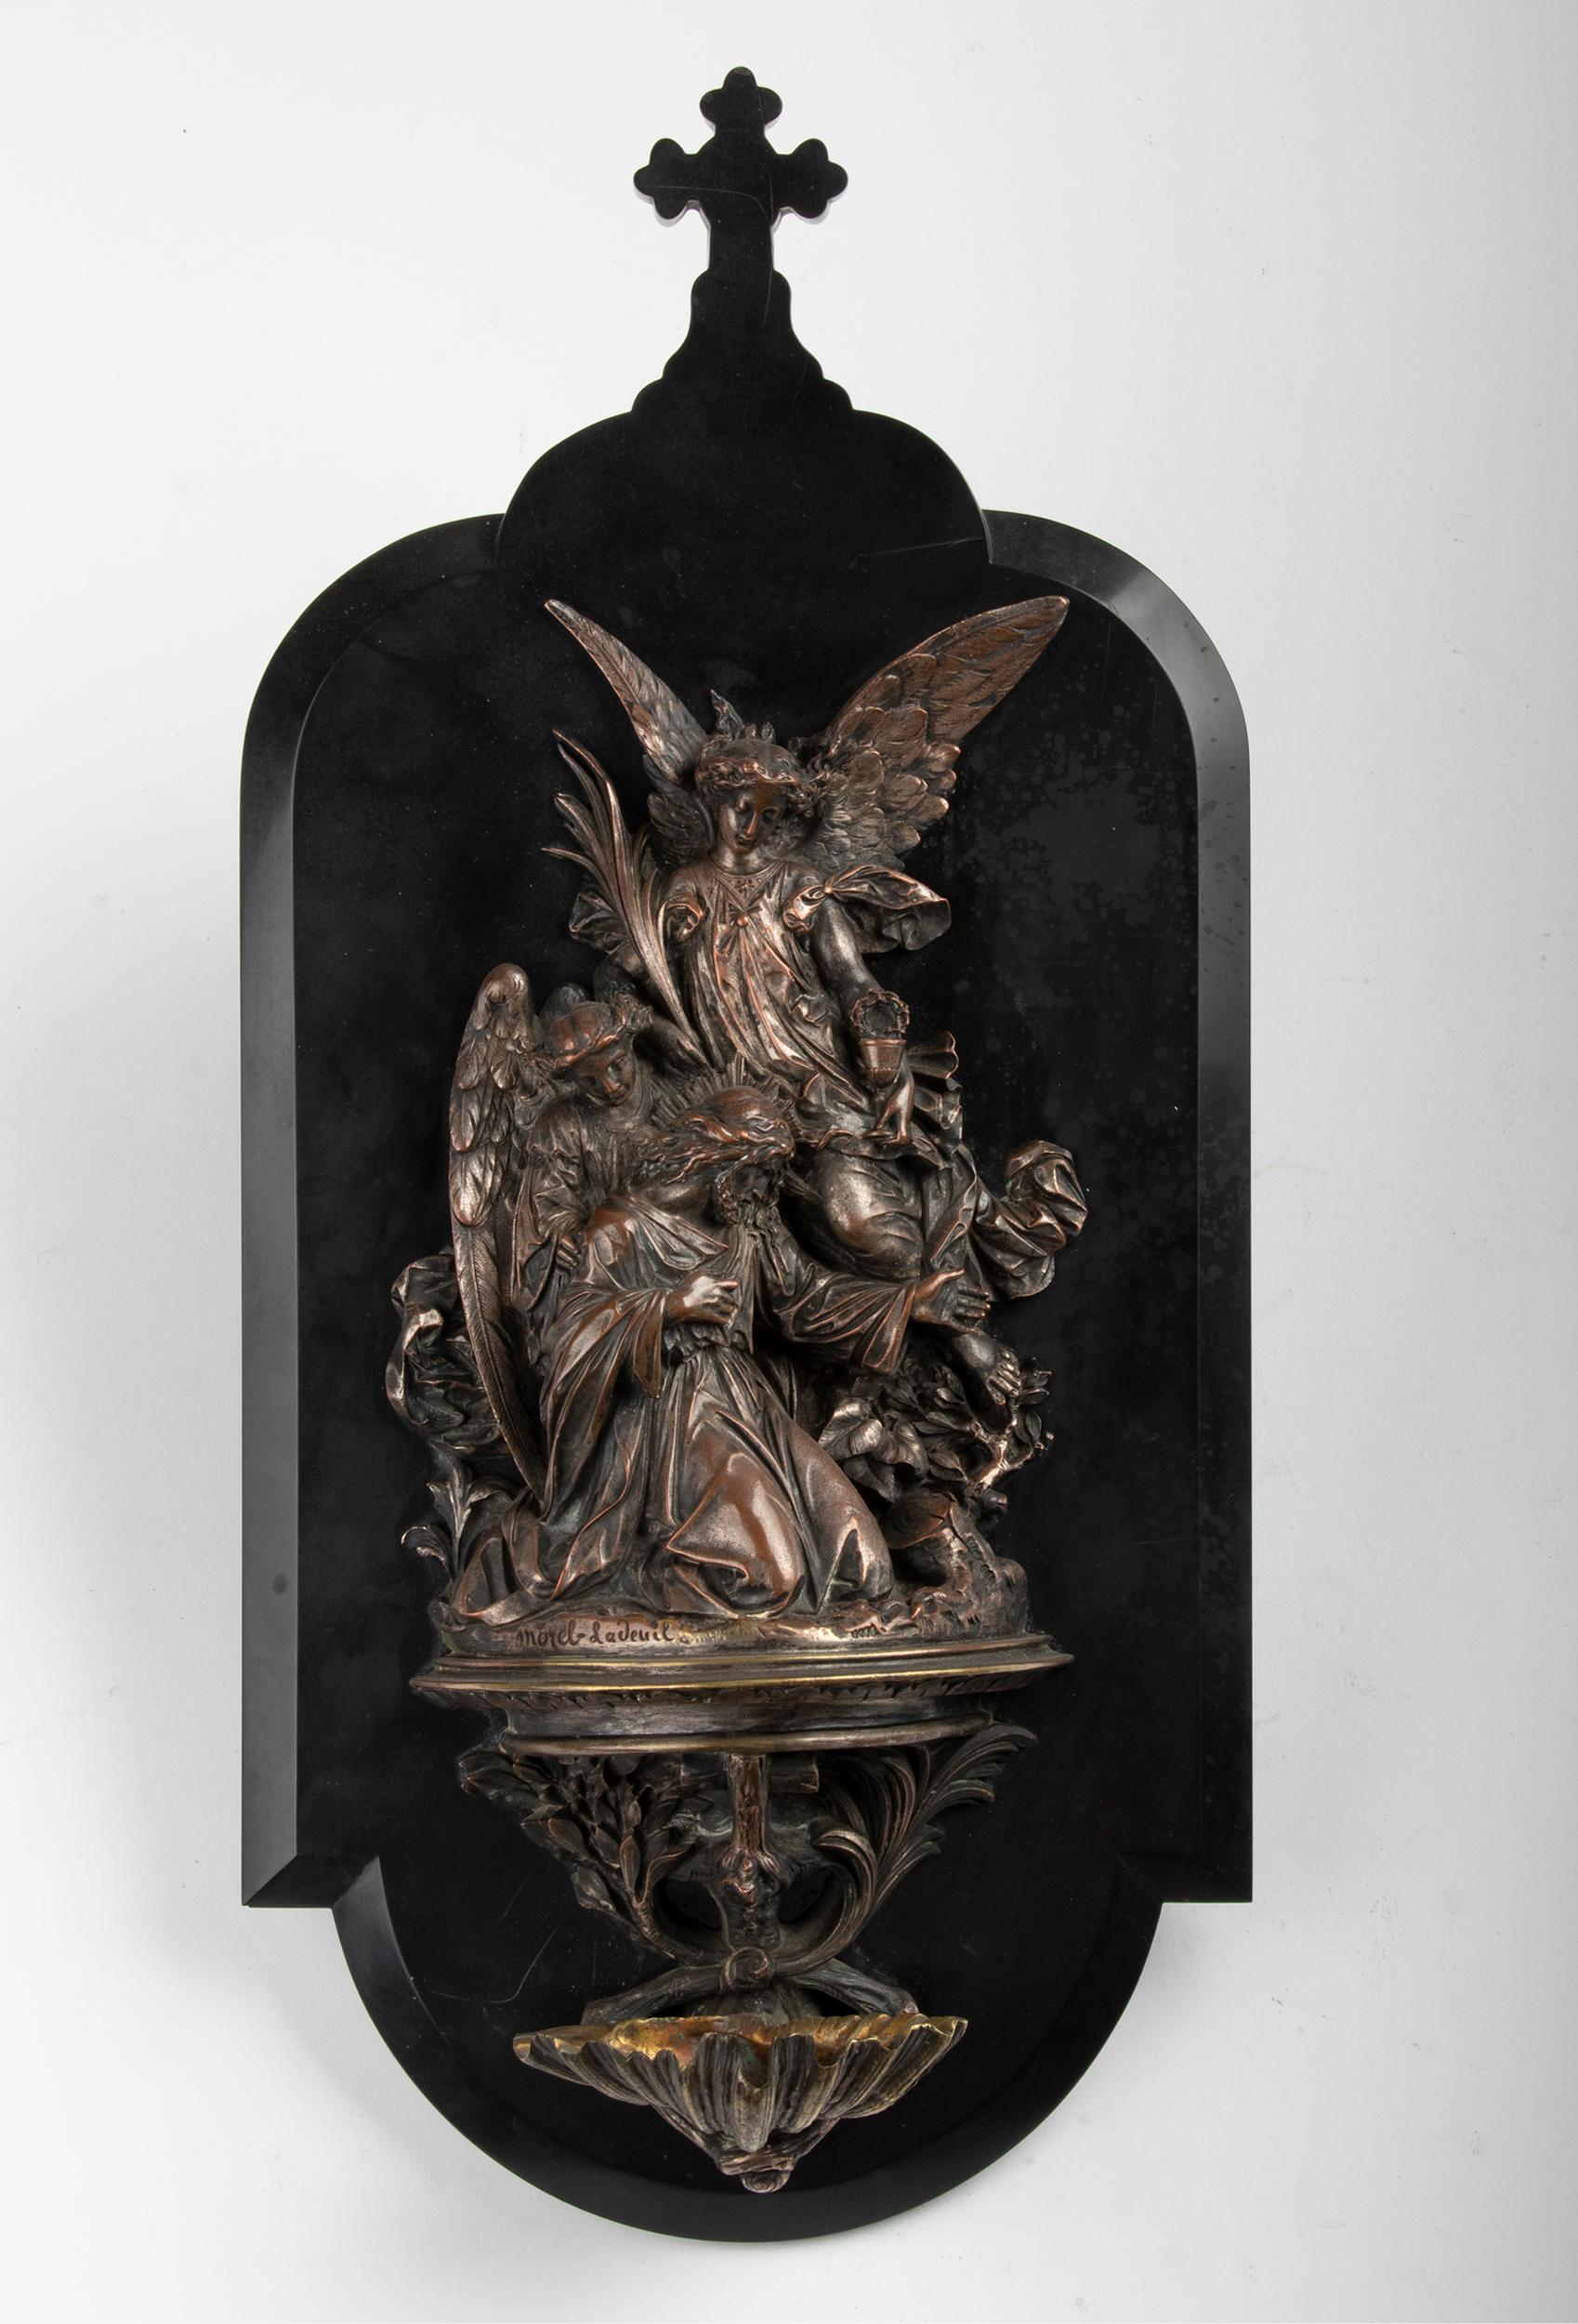 A fine French holy water font made of casted bronze, mounted on a black Belgian marble. Signed by Léonard Morel-Ladeuil. 
Depicting the 'Agony of Christ in the garden of Gethsemane'. Jesus, praying and begged God to release him from the terrible